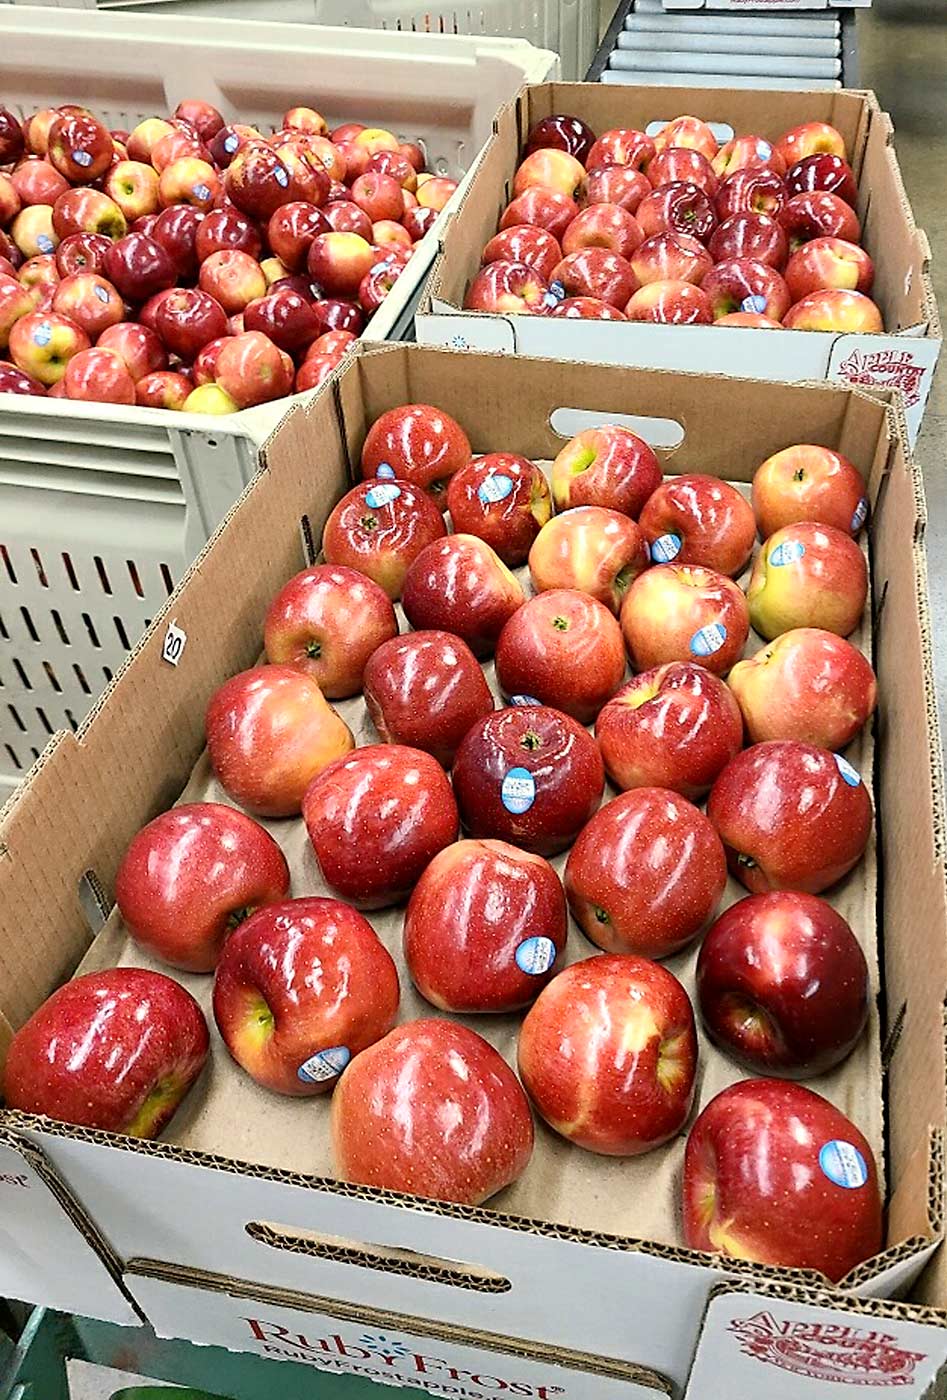 RubyFrost (NY 2) apples packed at Crist Bros. Orchards. RubyFrost and SnapDragon can still only be grown commercially by New York growers, but loosening that restriction is under consideration, according to Crunch Time Apple Growers director Jessica Wells.(Courtesy Crunch Time Apple Growers)